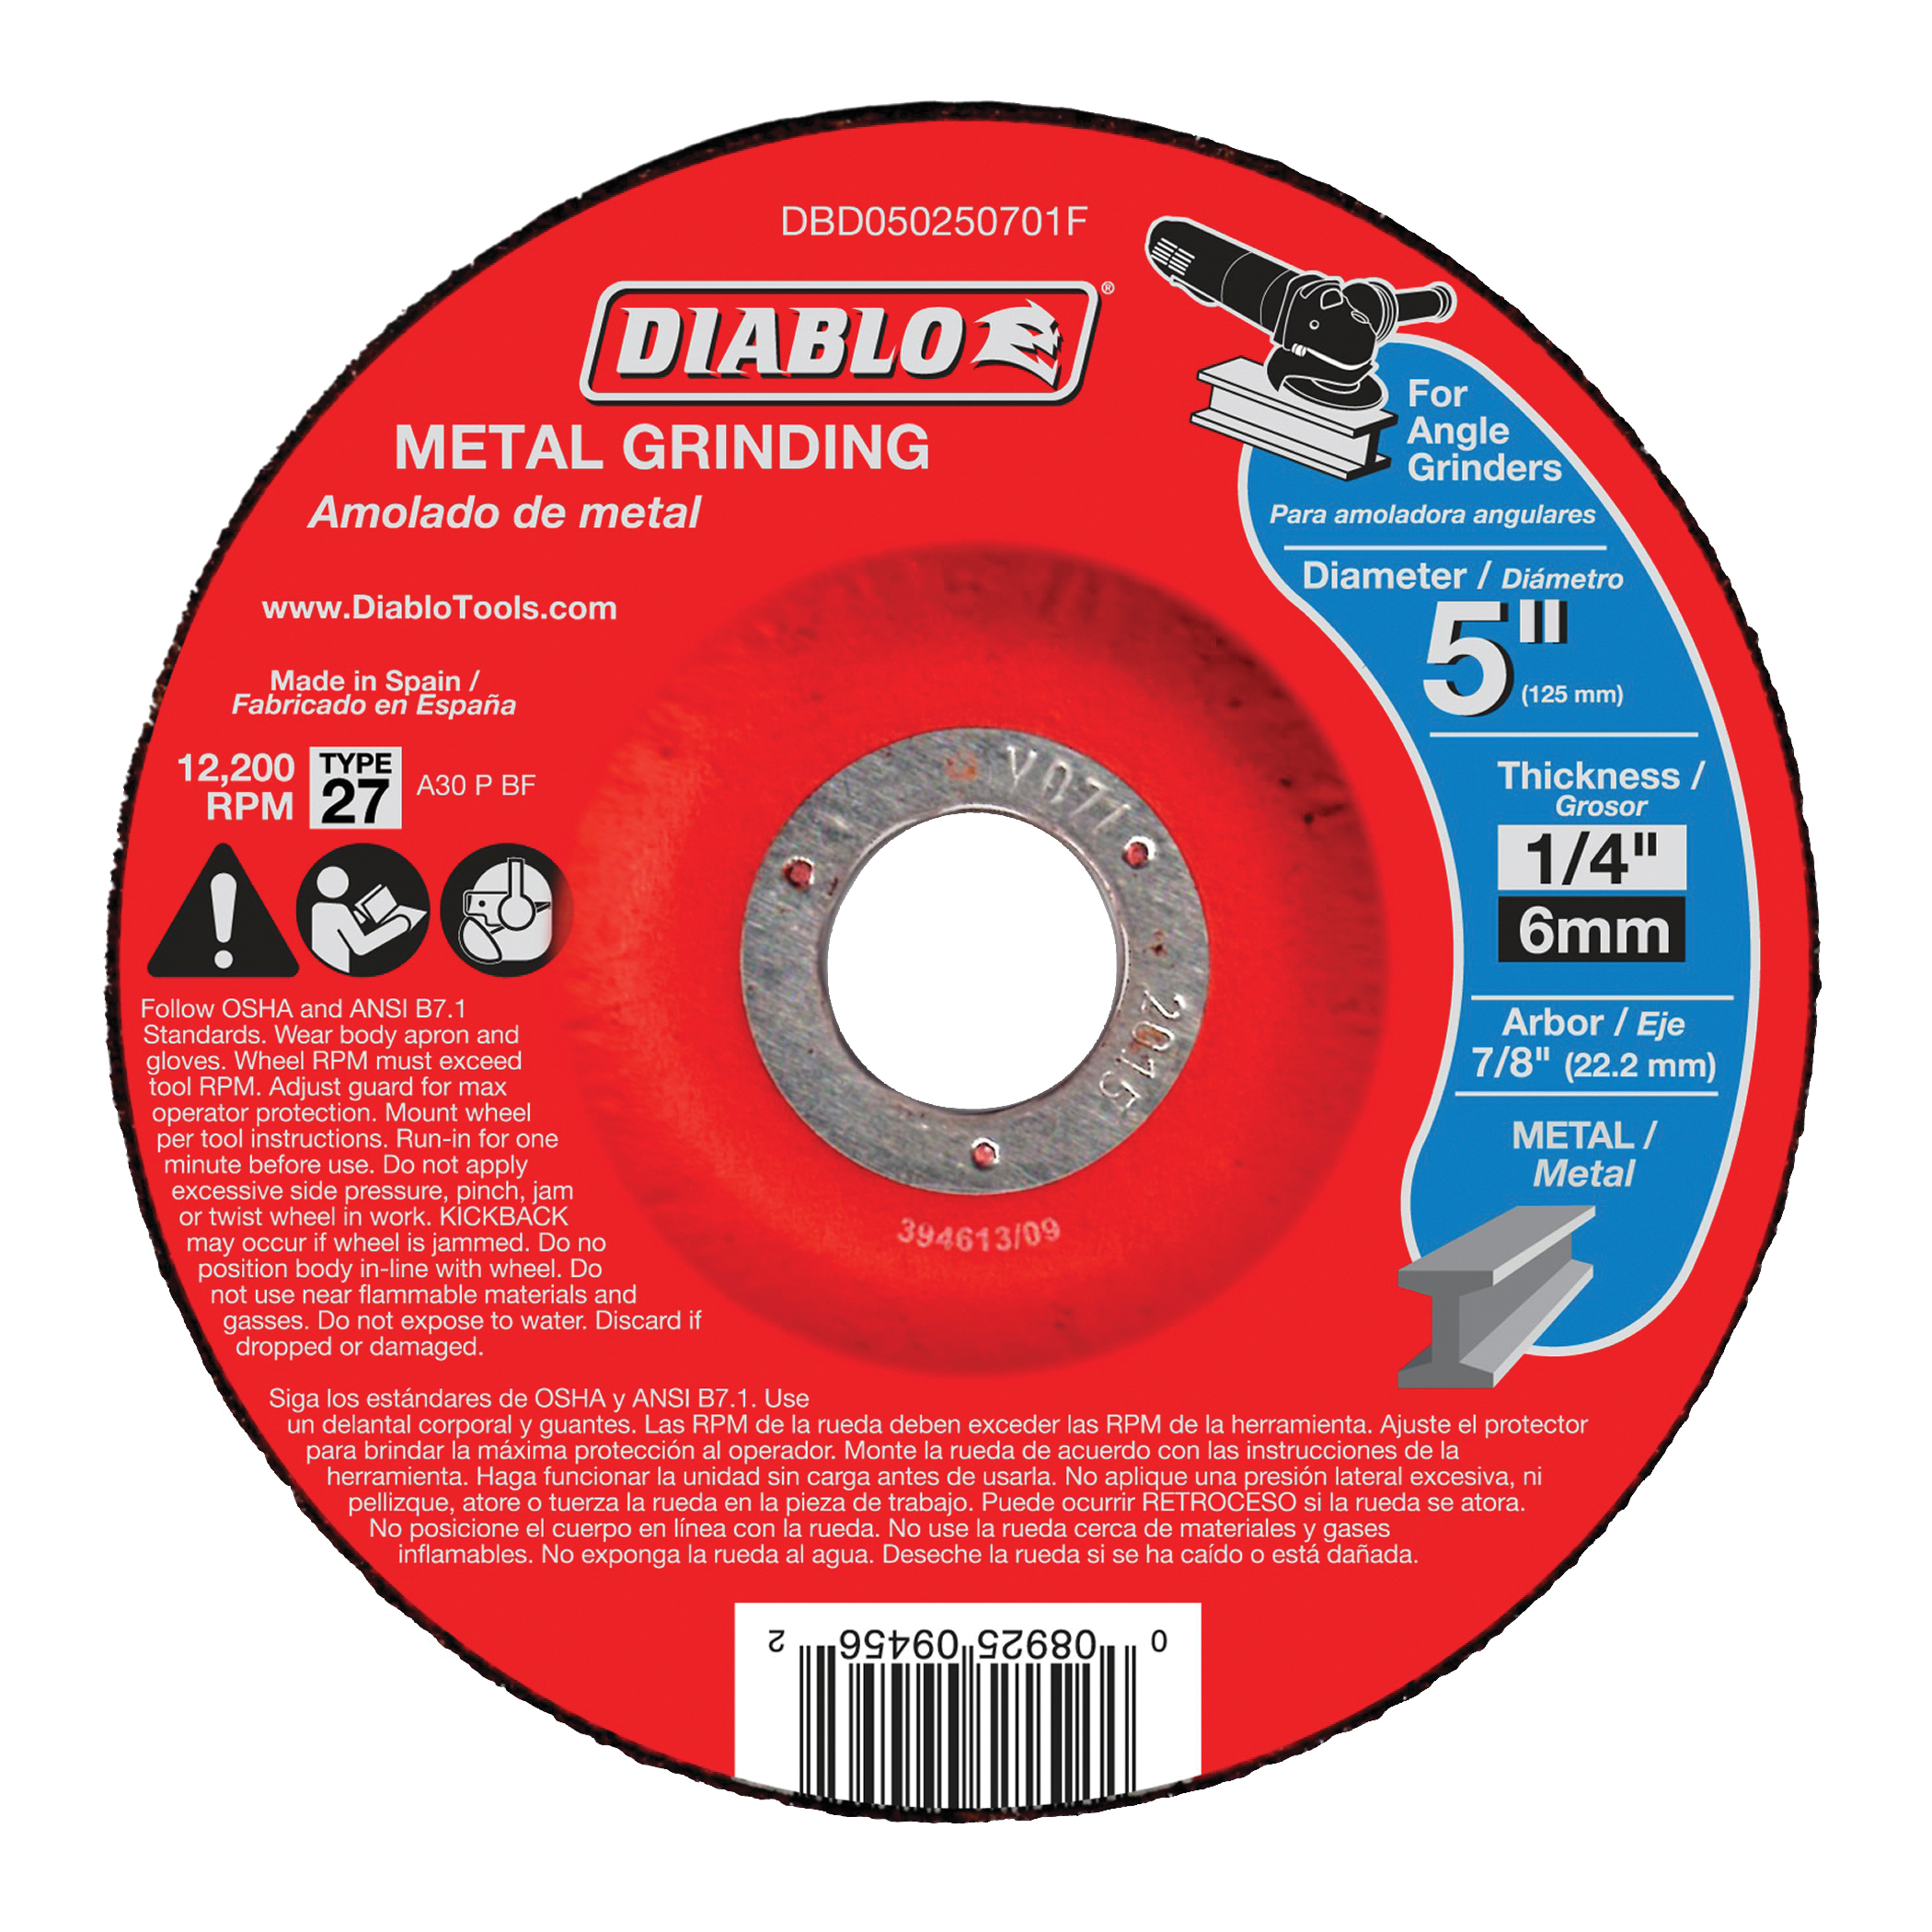 DBD050250701F Grinding Wheel, 5 in Dia, 1/4 in Thick, 7/8 in Arbor, Aluminum Oxide Abrasive